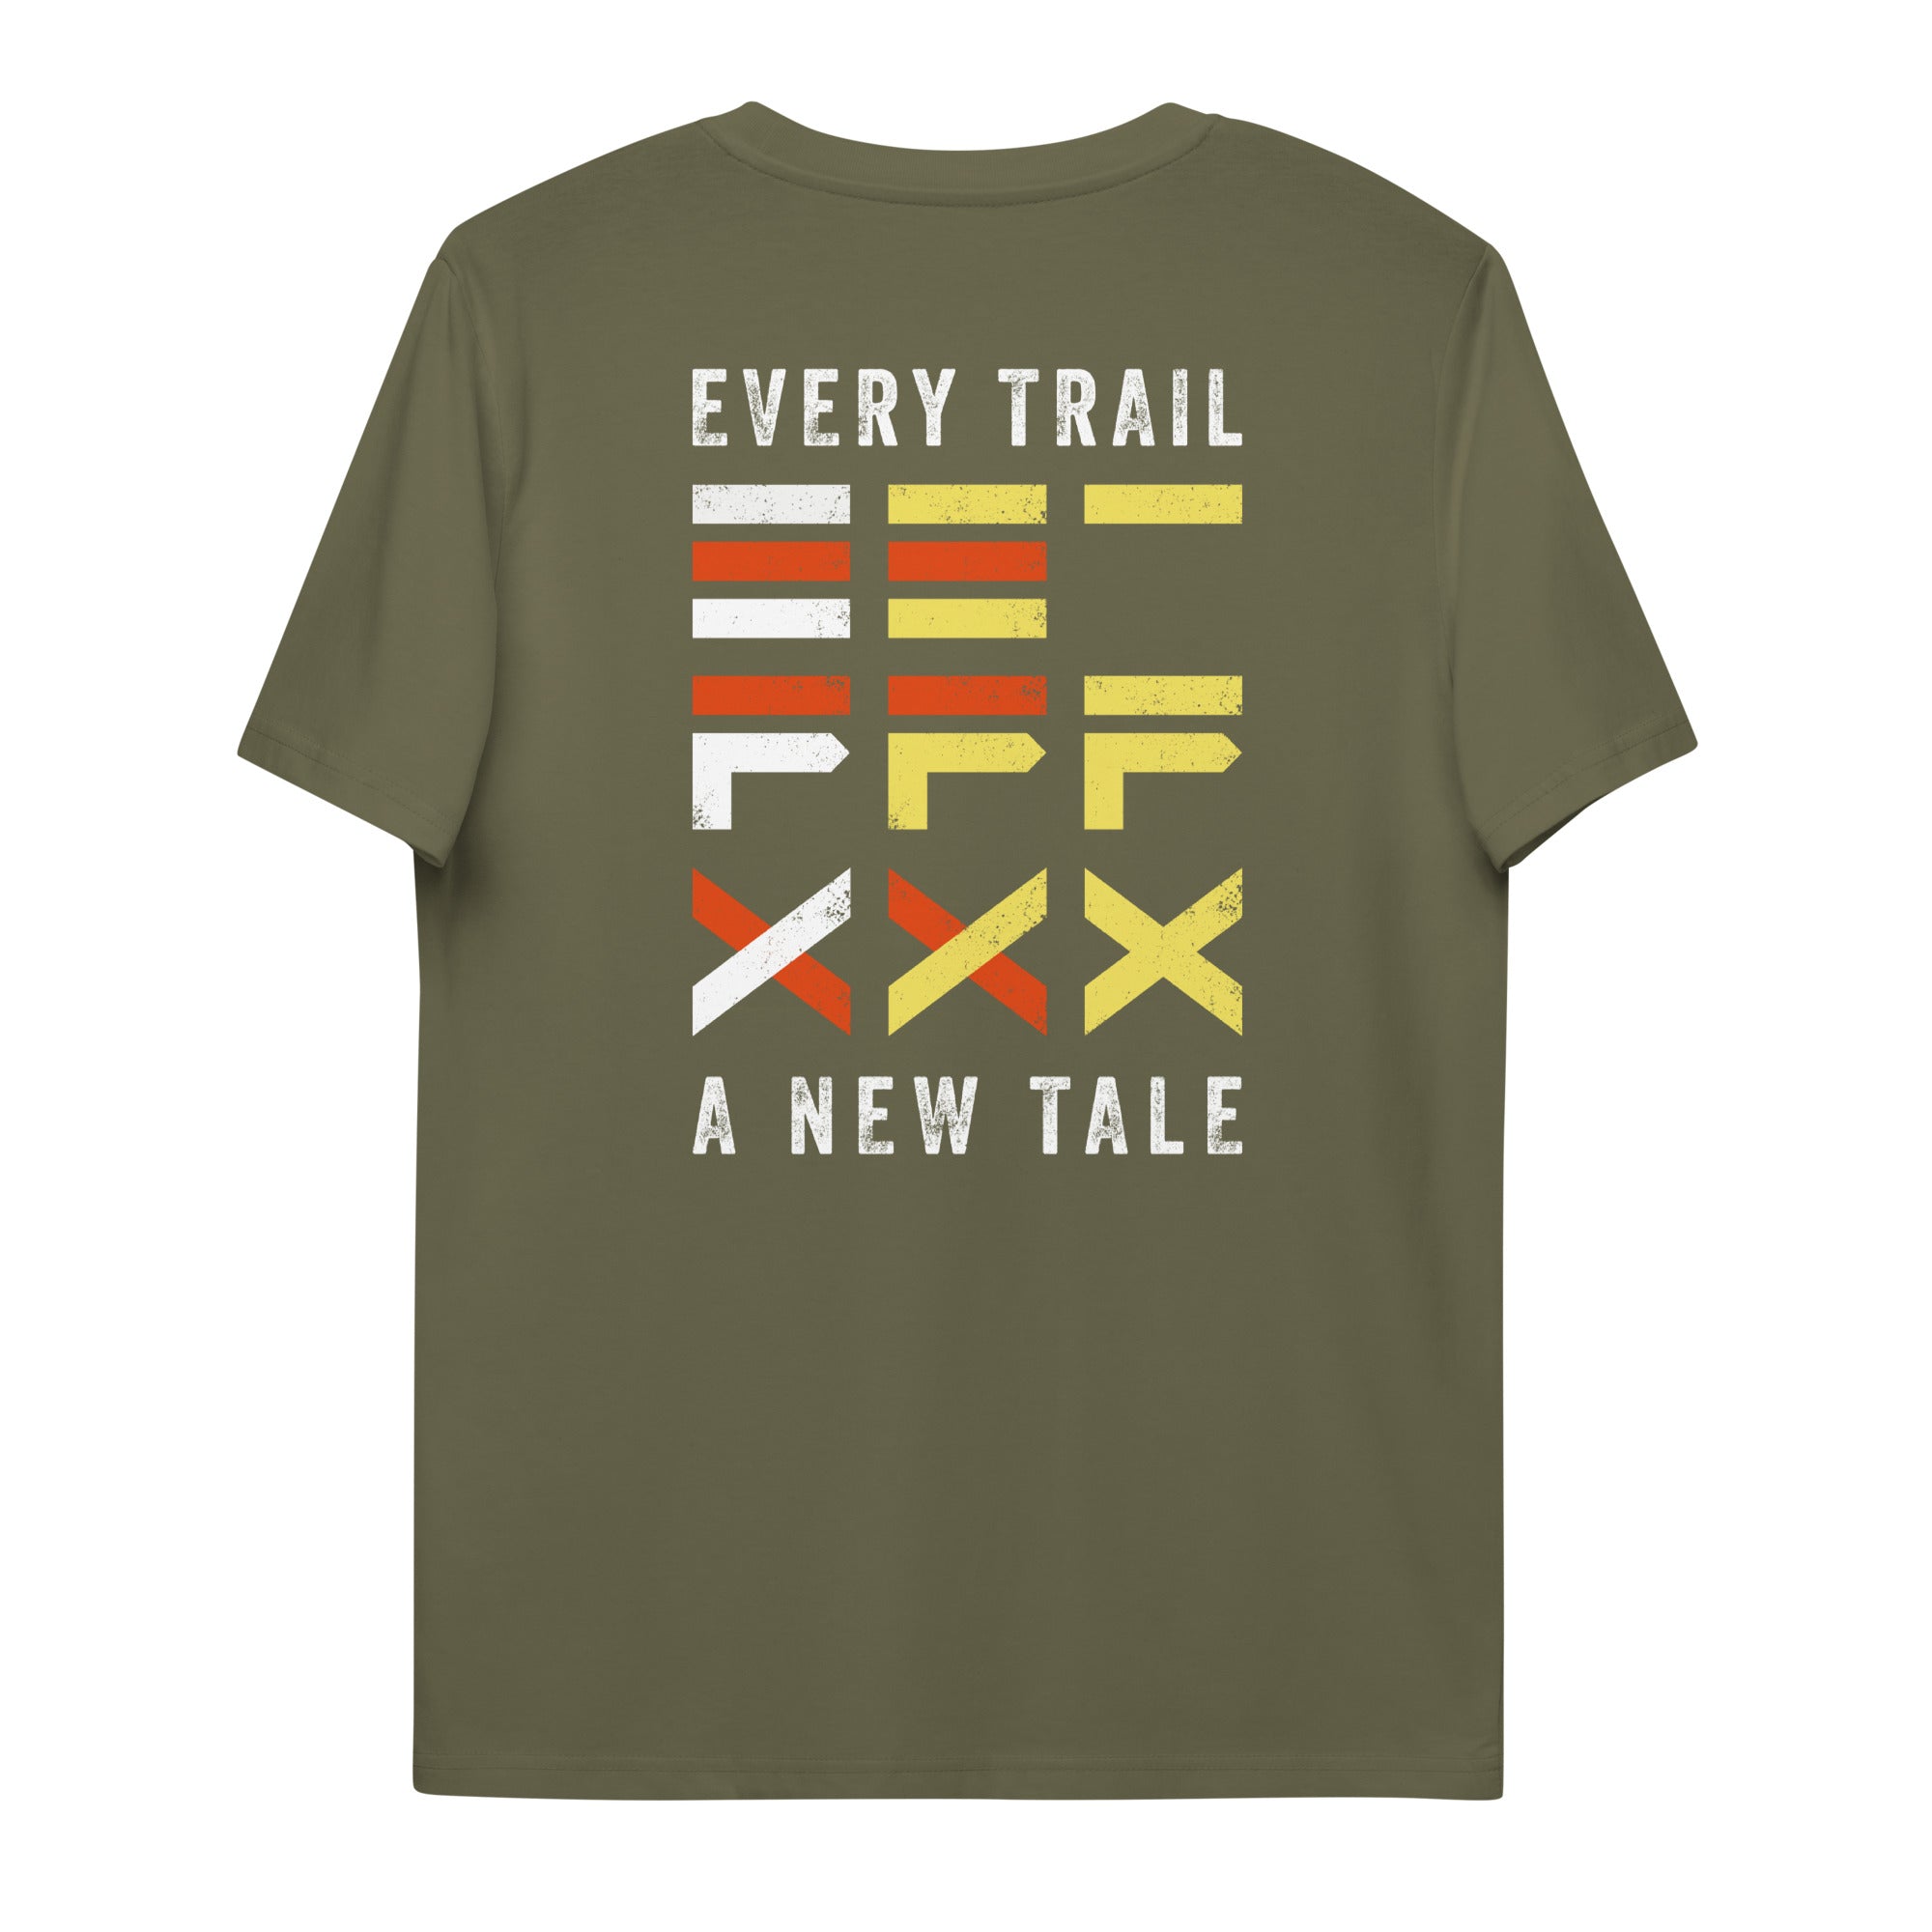 T-Shirt Premium Unisexe Eco Responsable - Graphique - Every trail is a new tale